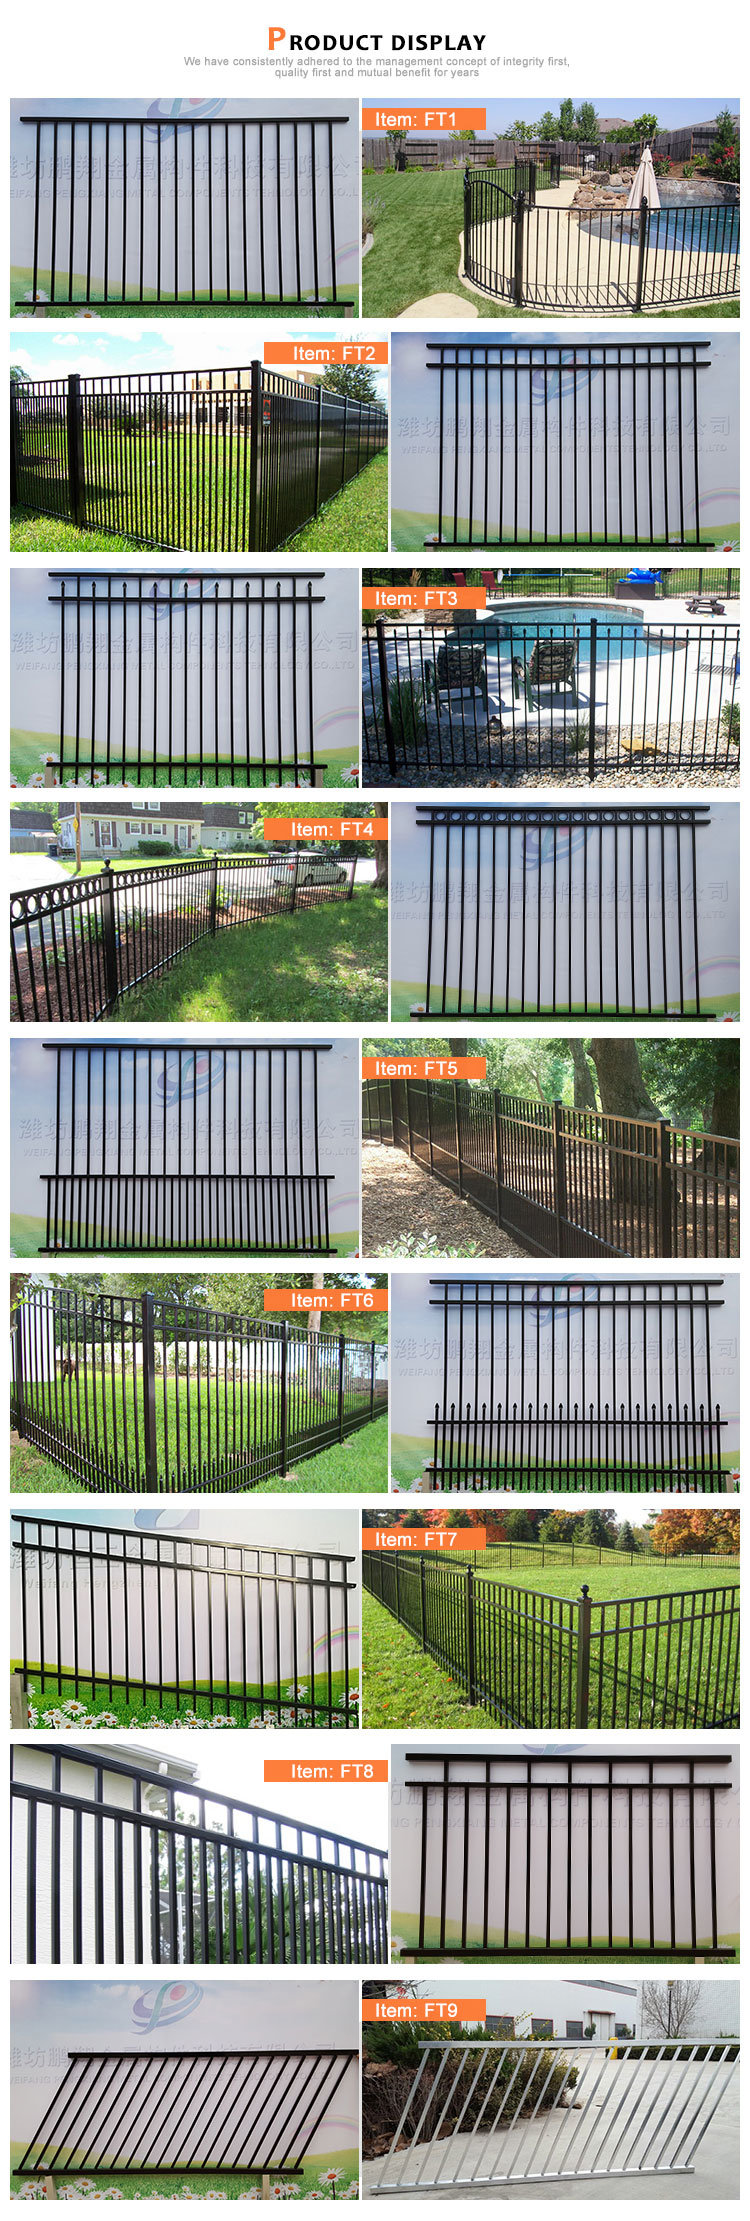 North American Style Fence, Privacy Fence, Fence Panel, Garden Fence